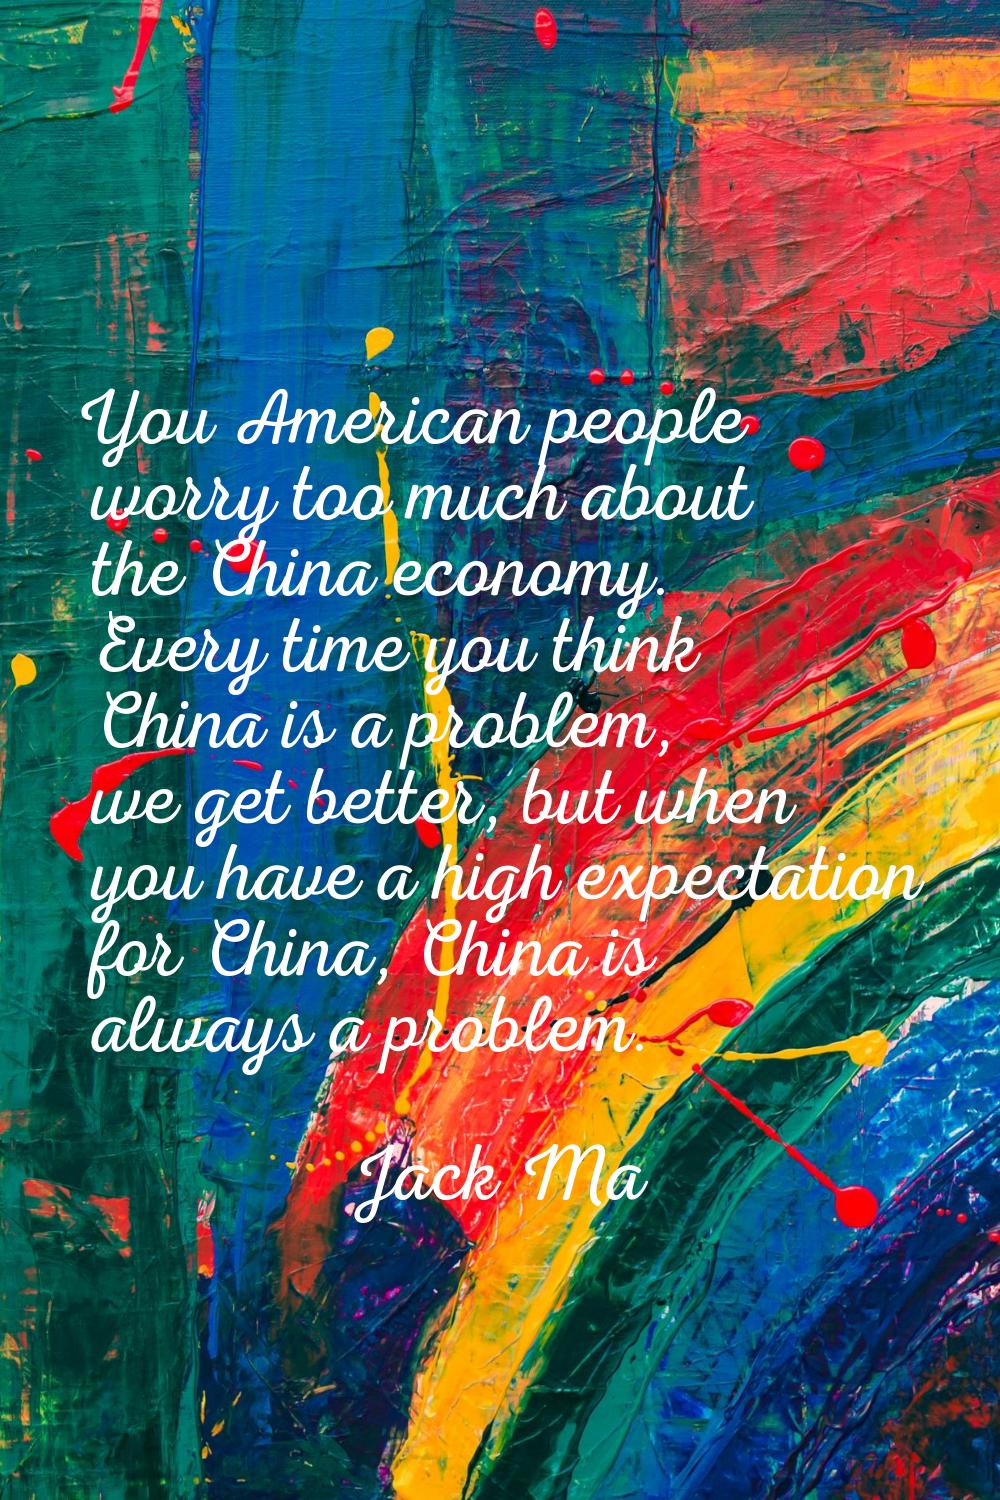 You American people worry too much about the China economy. Every time you think China is a problem